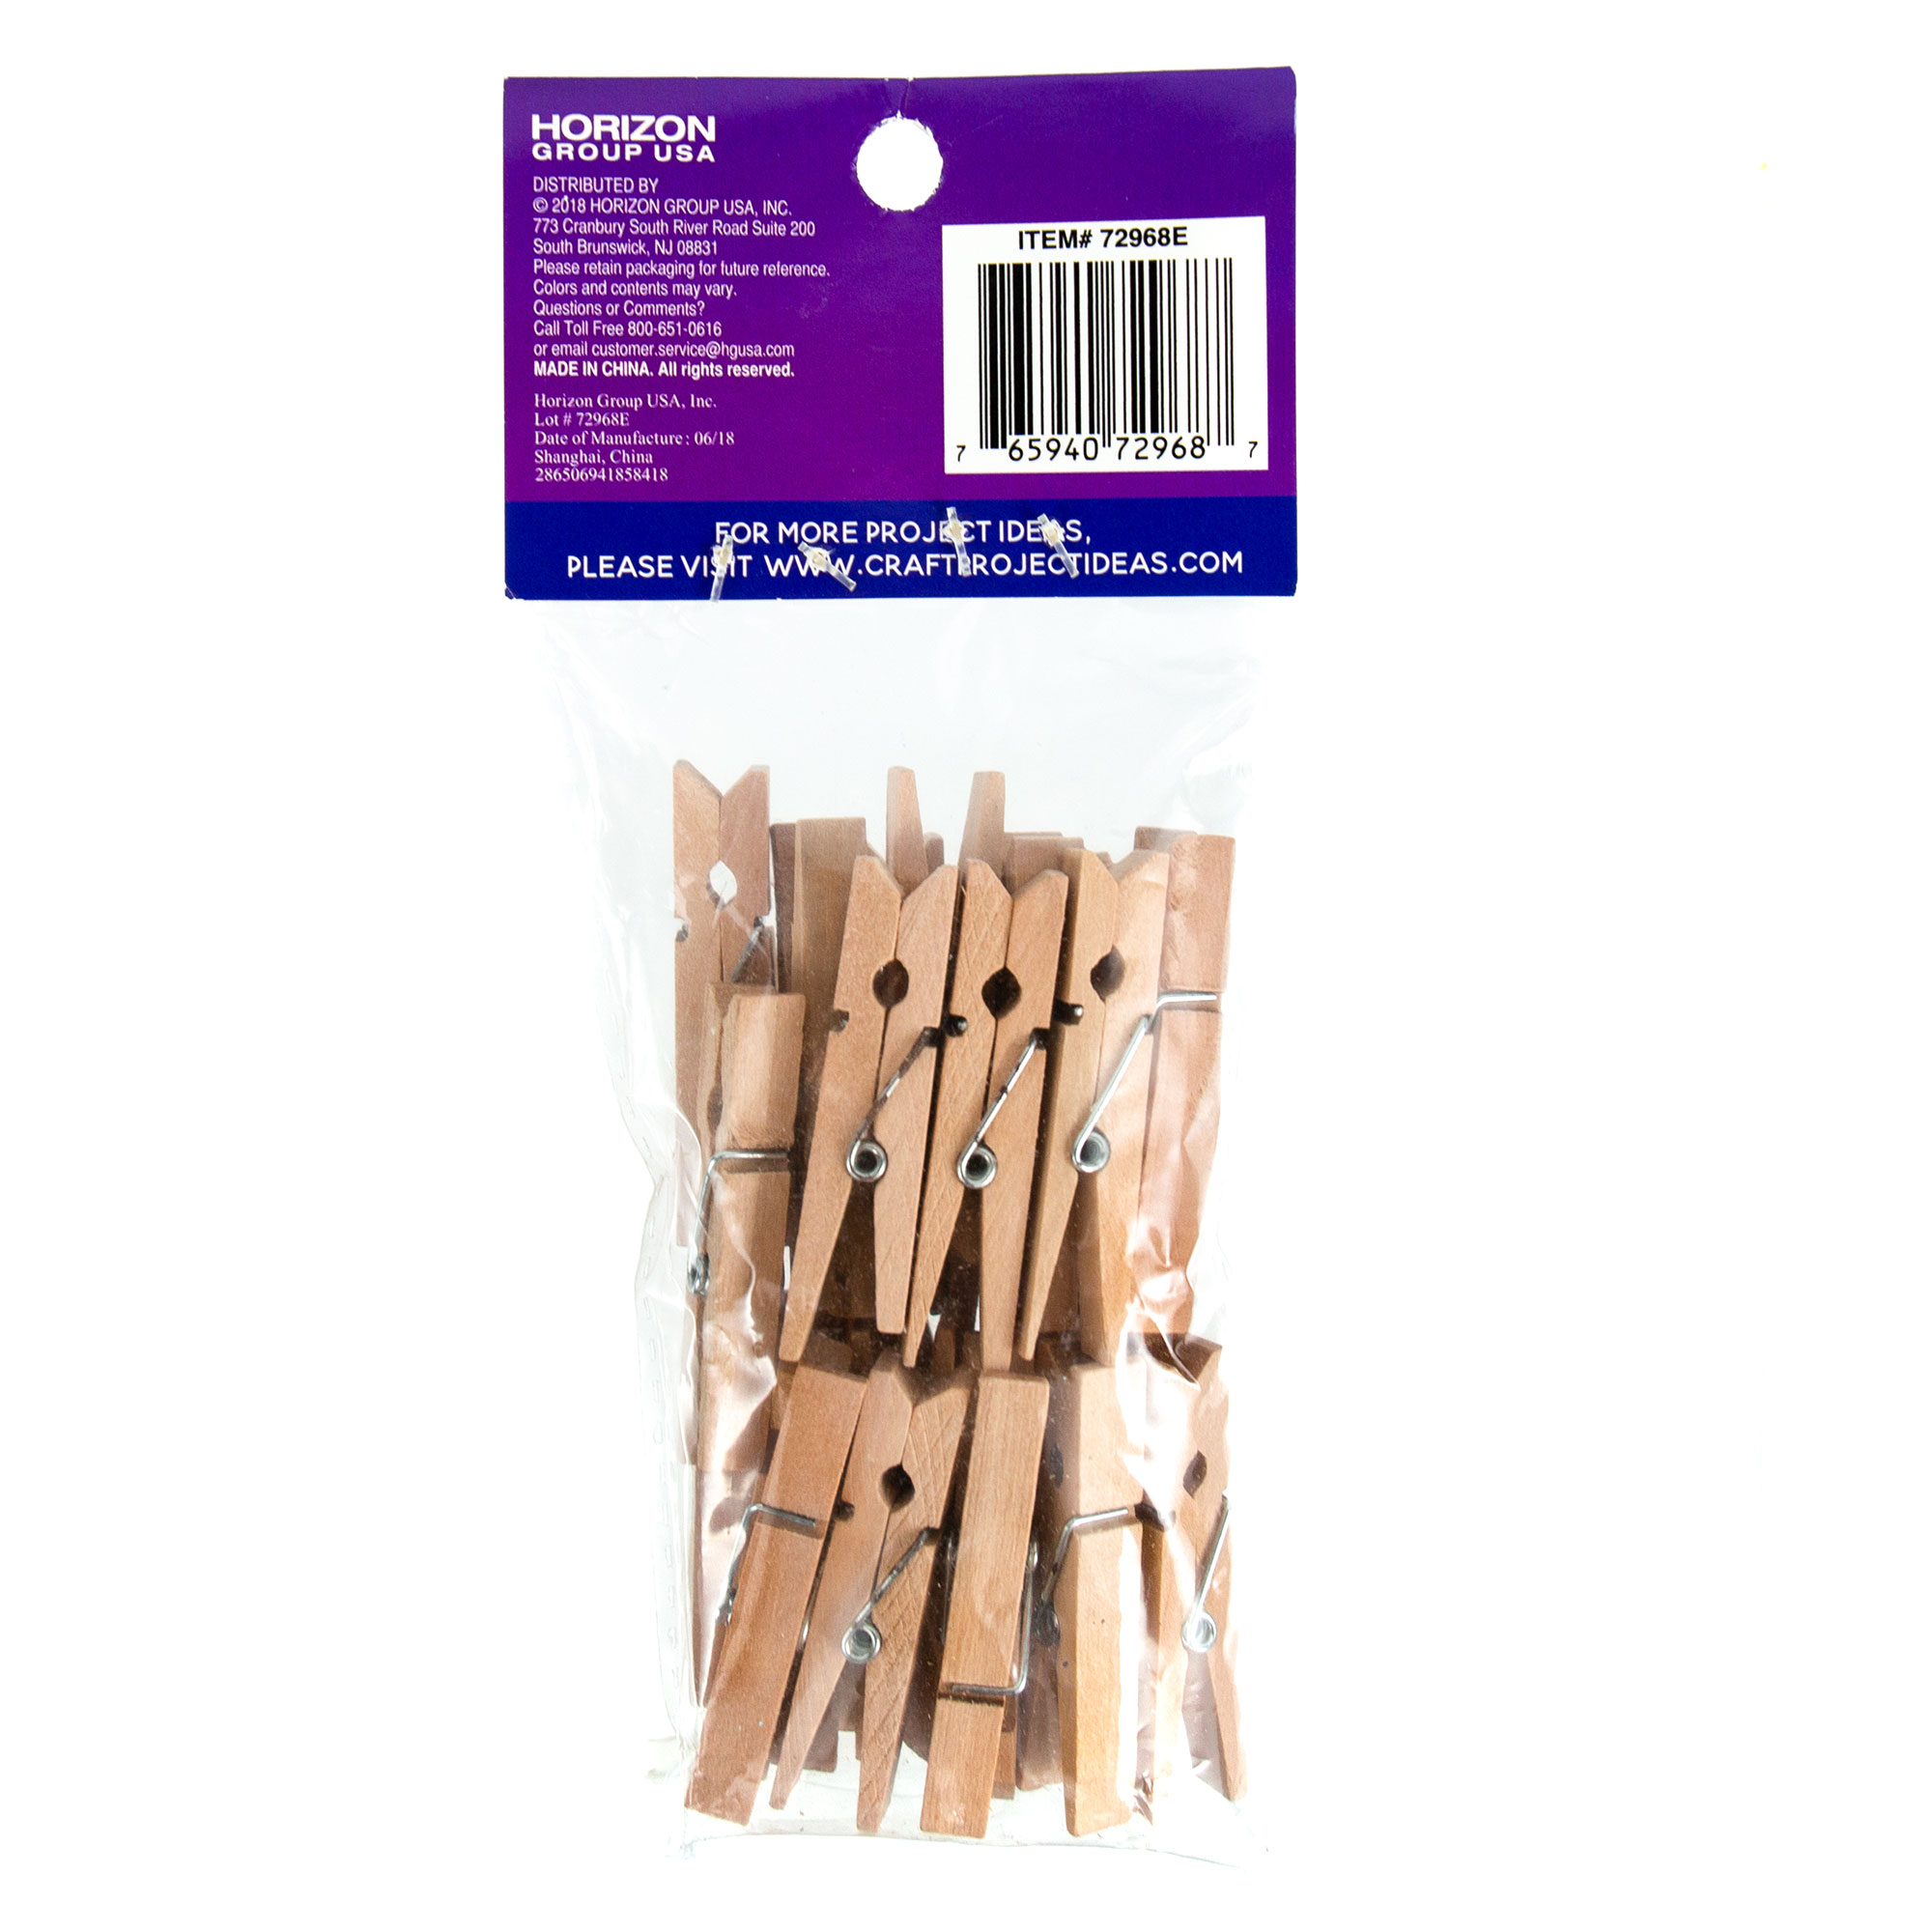 Go Create Small Wooden Clothespins, 24-Pack Small Wood Clothespins - image 4 of 4